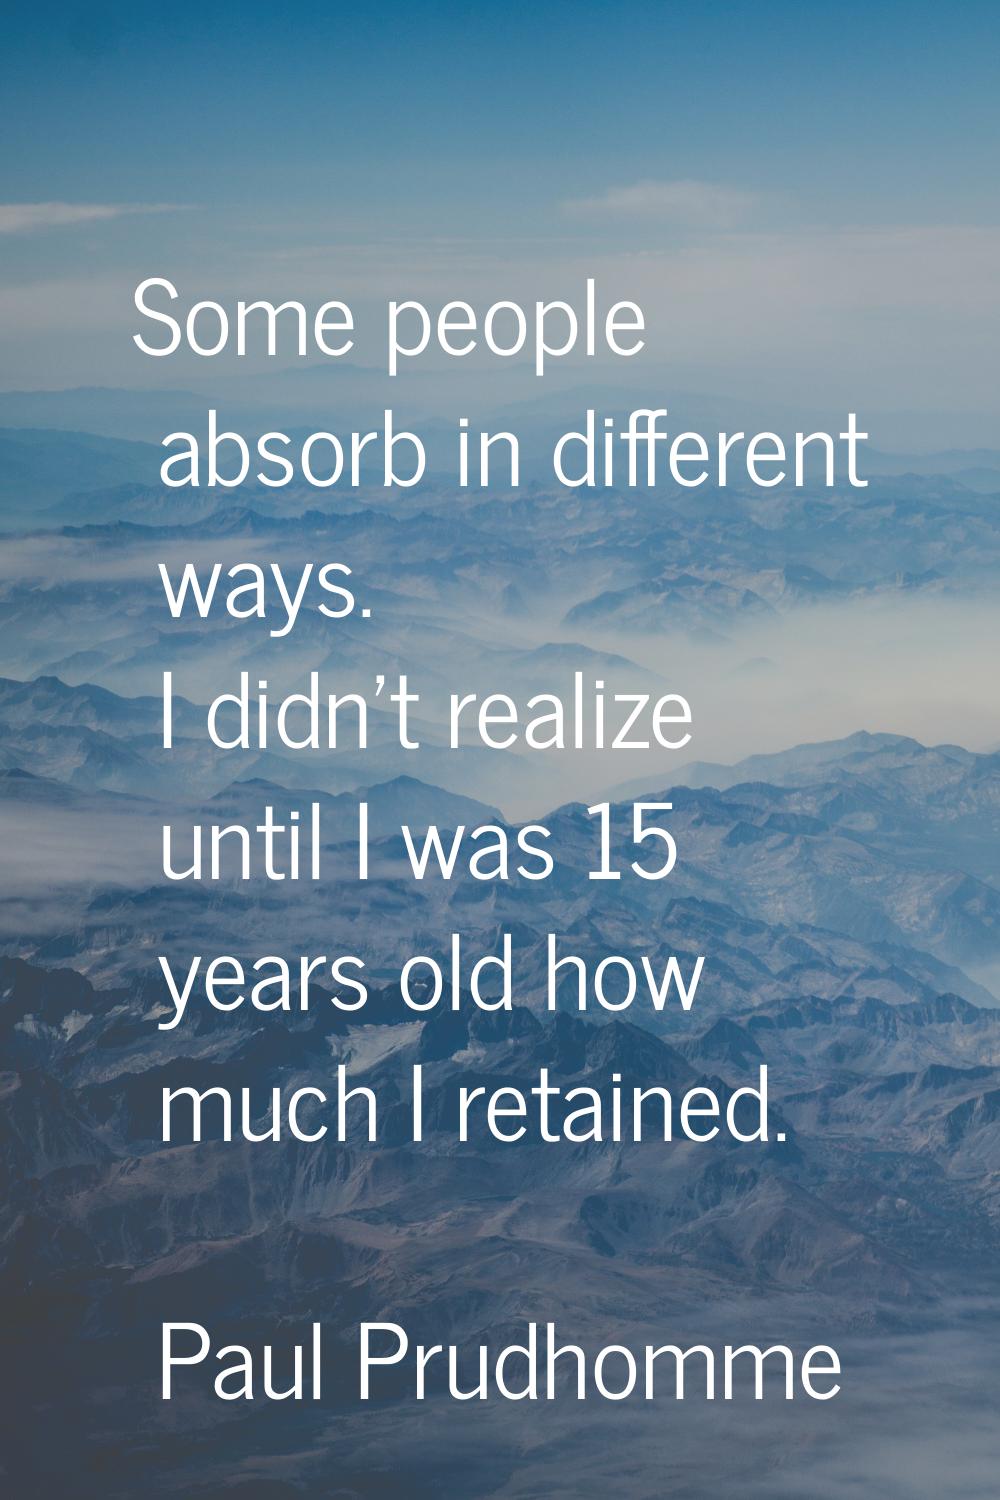 Some people absorb in different ways. I didn't realize until I was 15 years old how much I retained